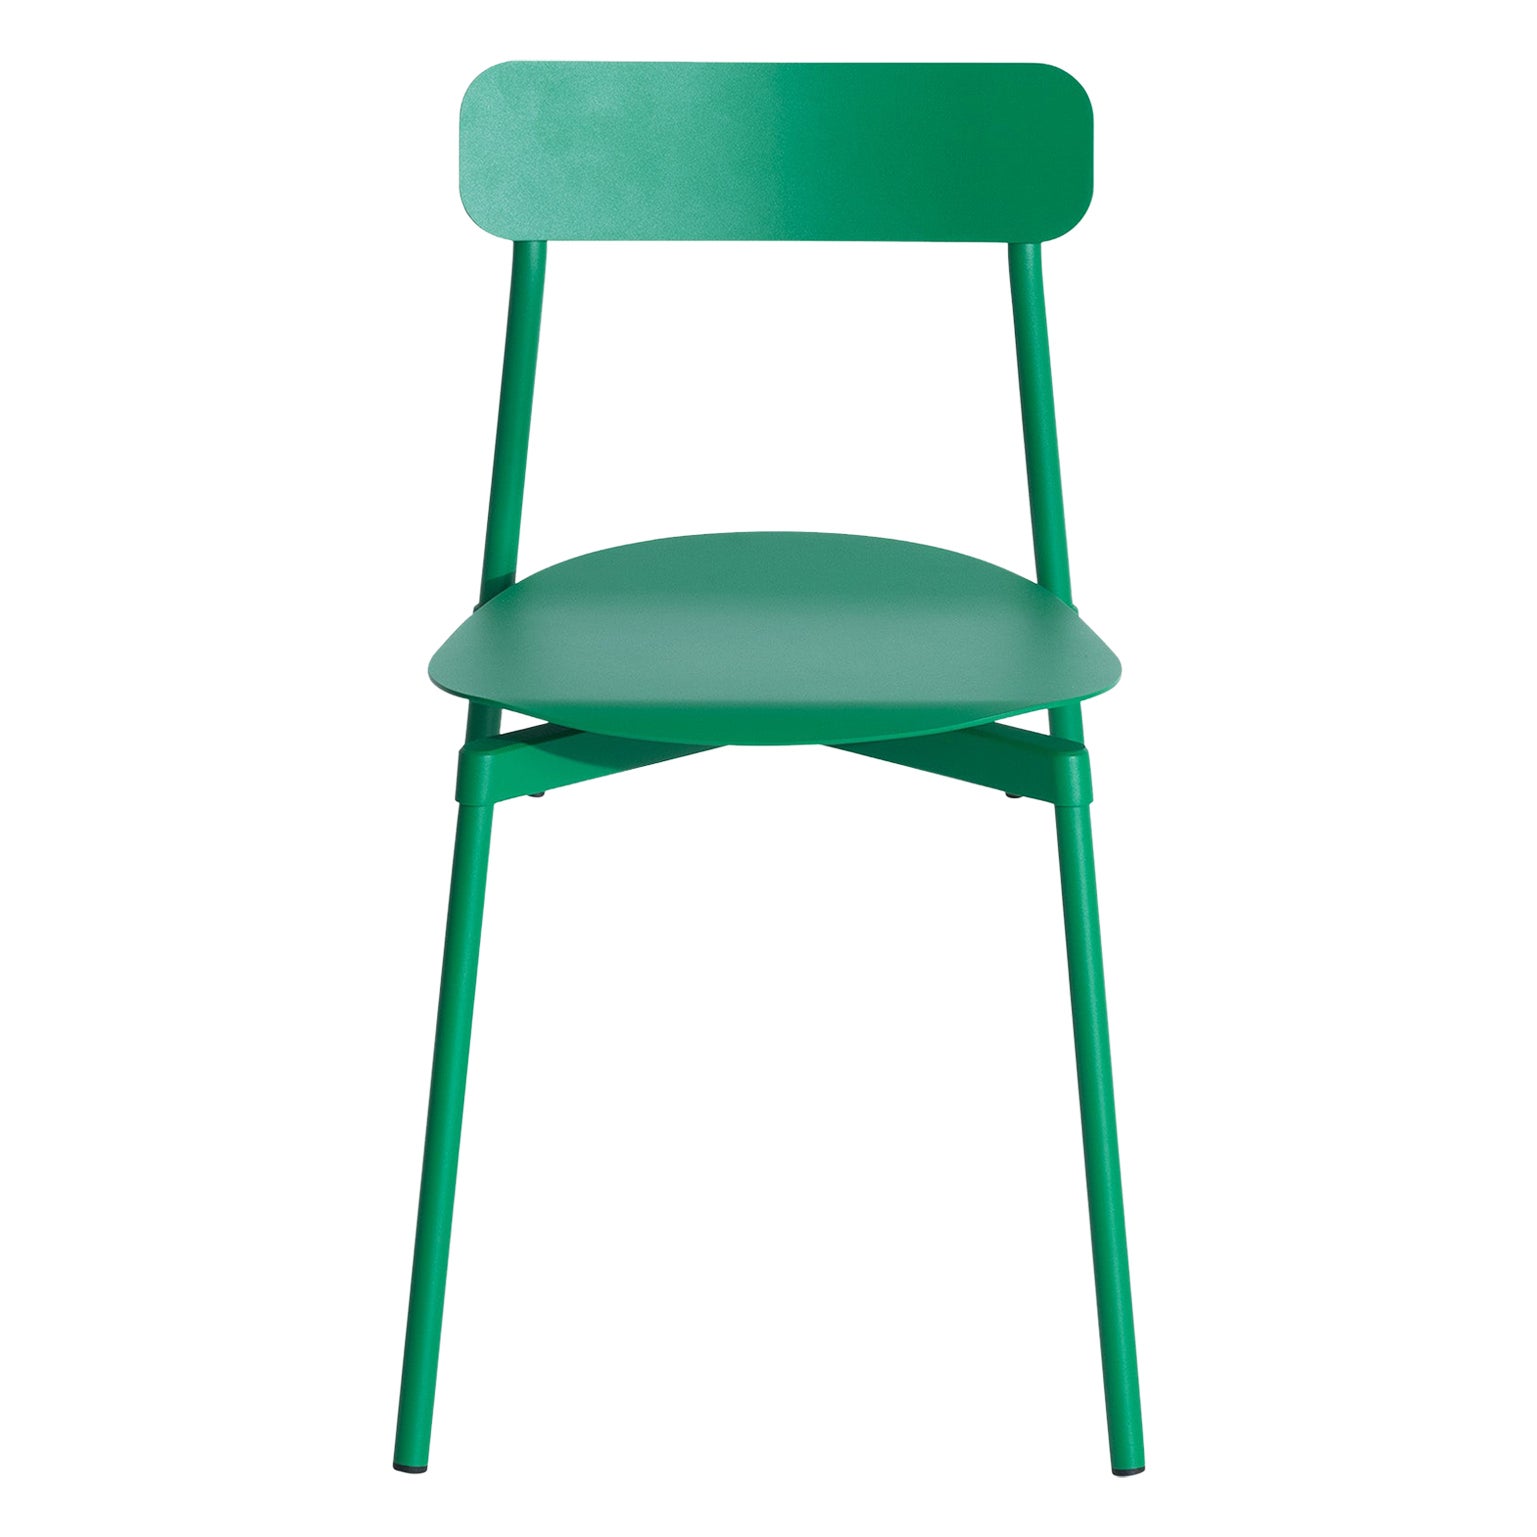 Petite Friture Fromme Chair in Mint-Green Aluminium by Tom Chung, 2019